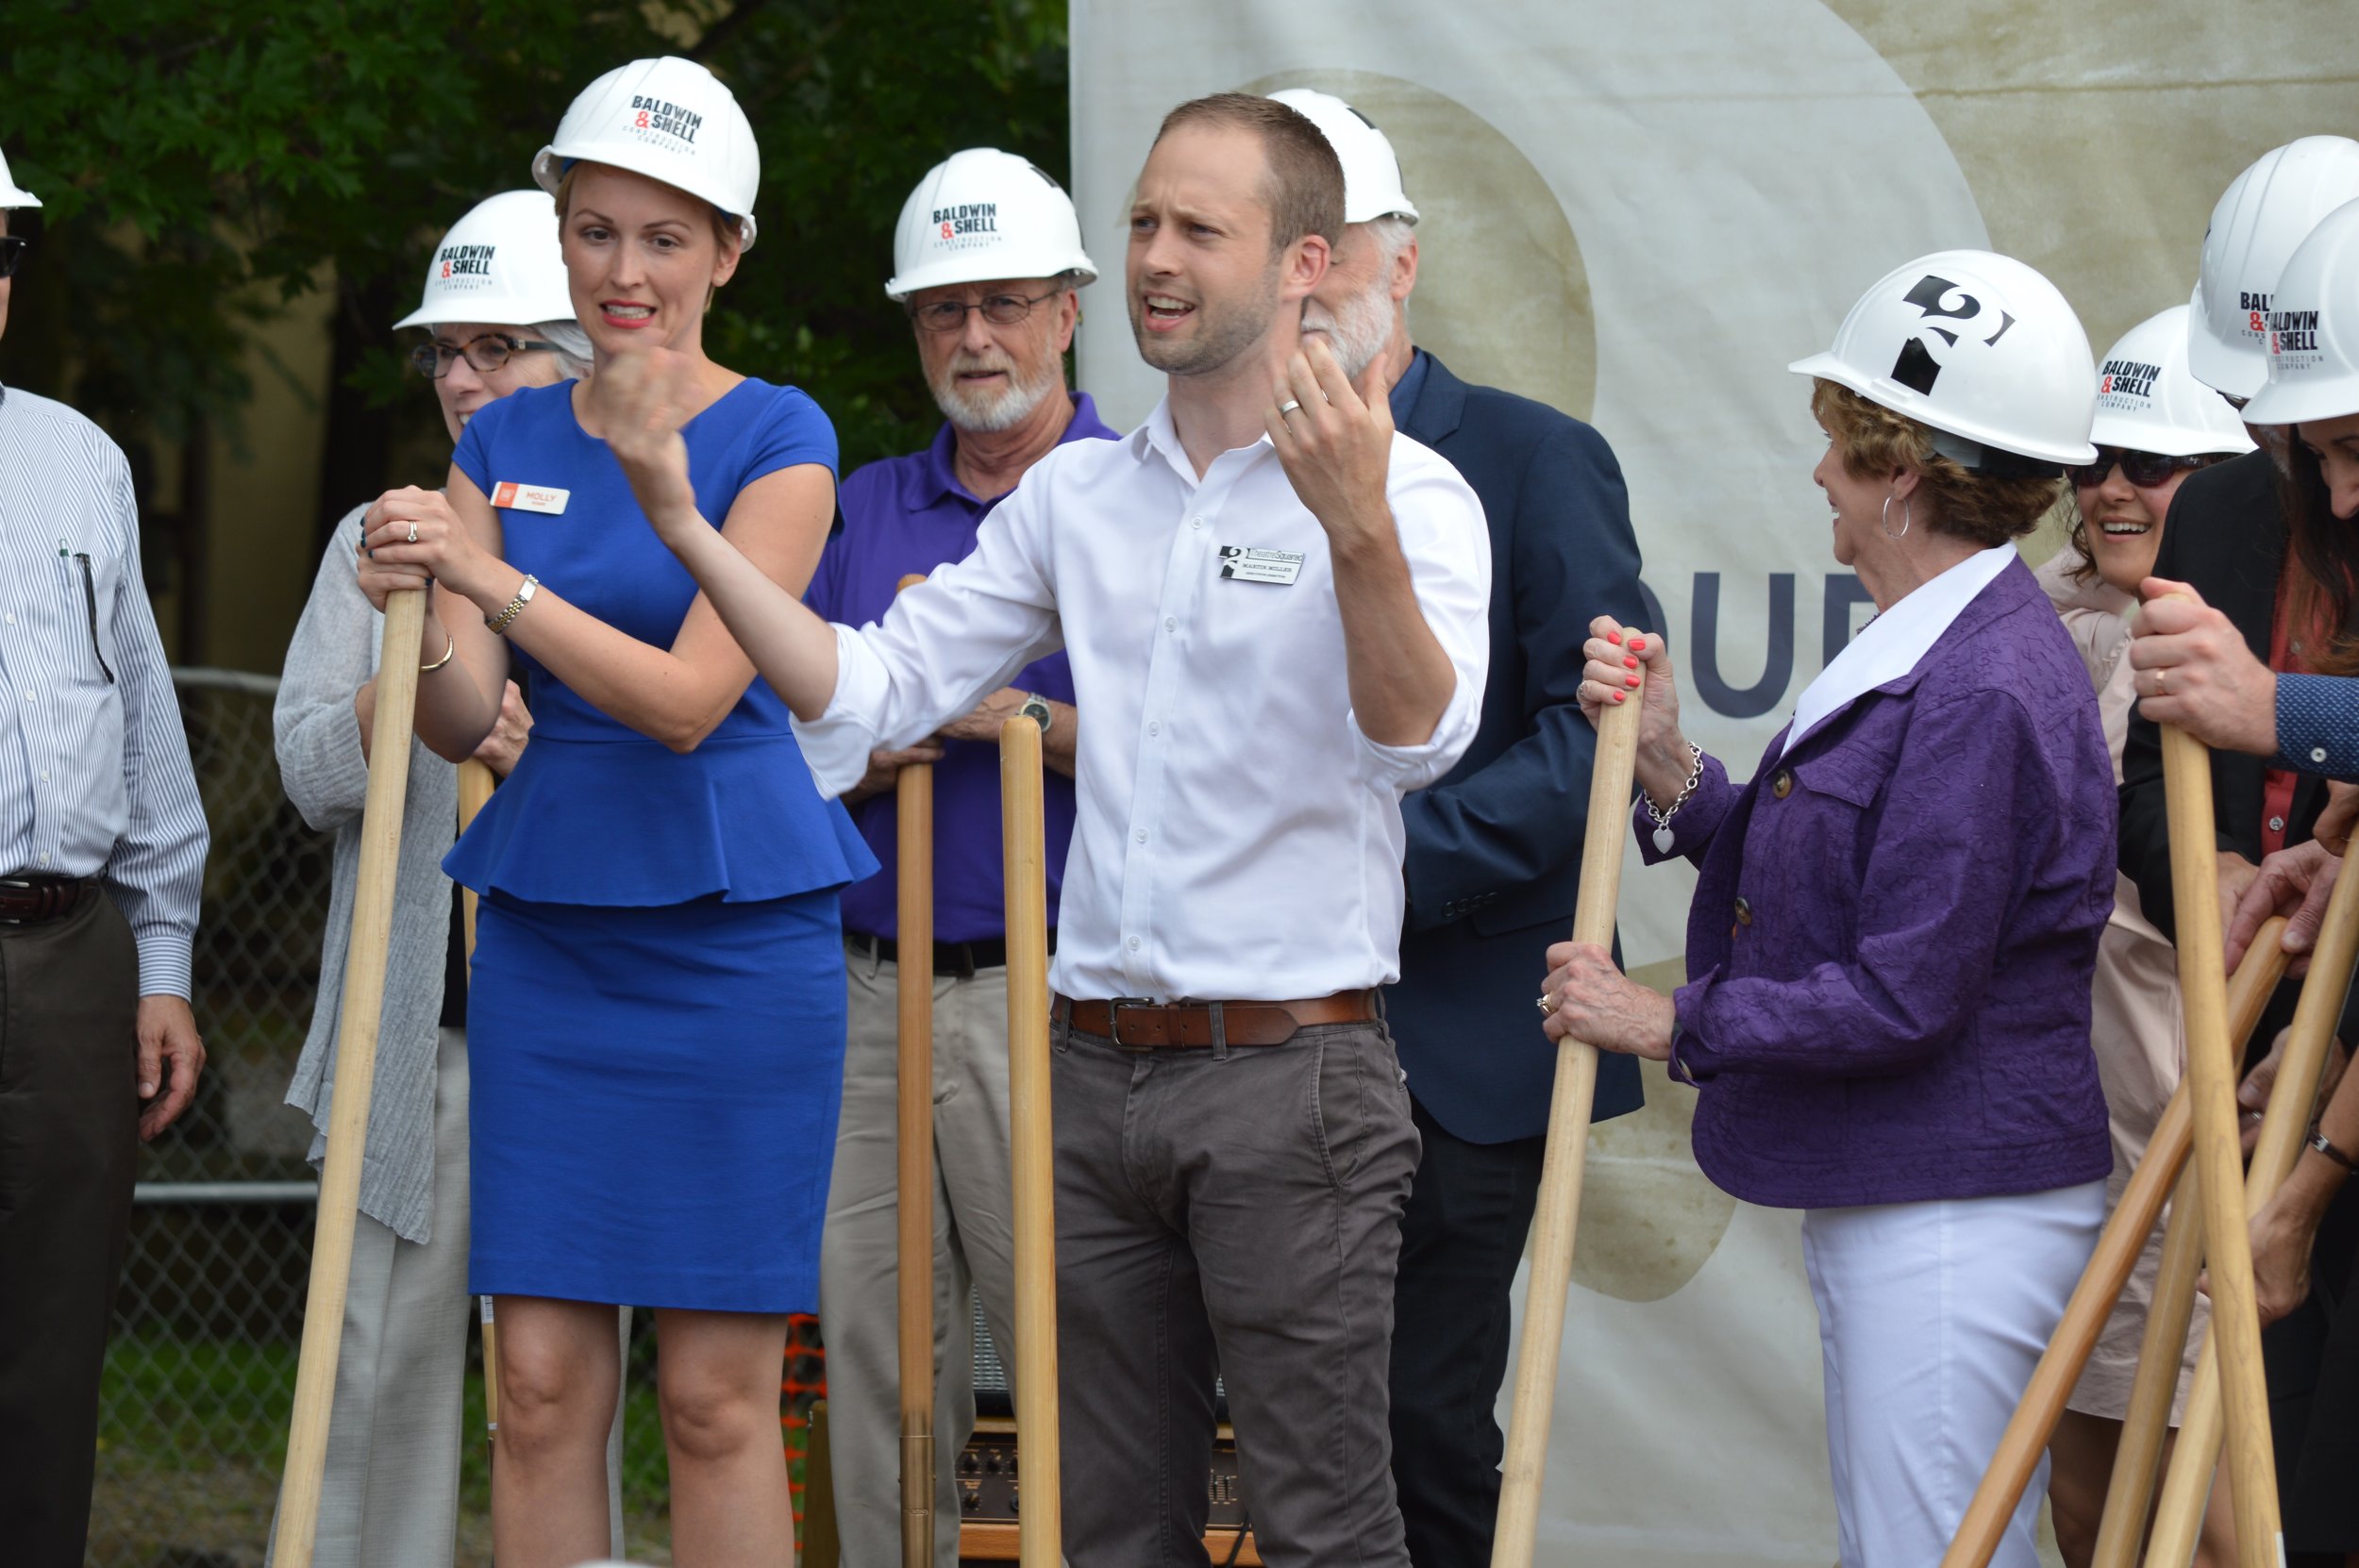 Martin Miller of TheatreSquared encourages the crowd to cheer during the groundbreaking ceremony for the professional theatre company's new facility in Fayetteville.